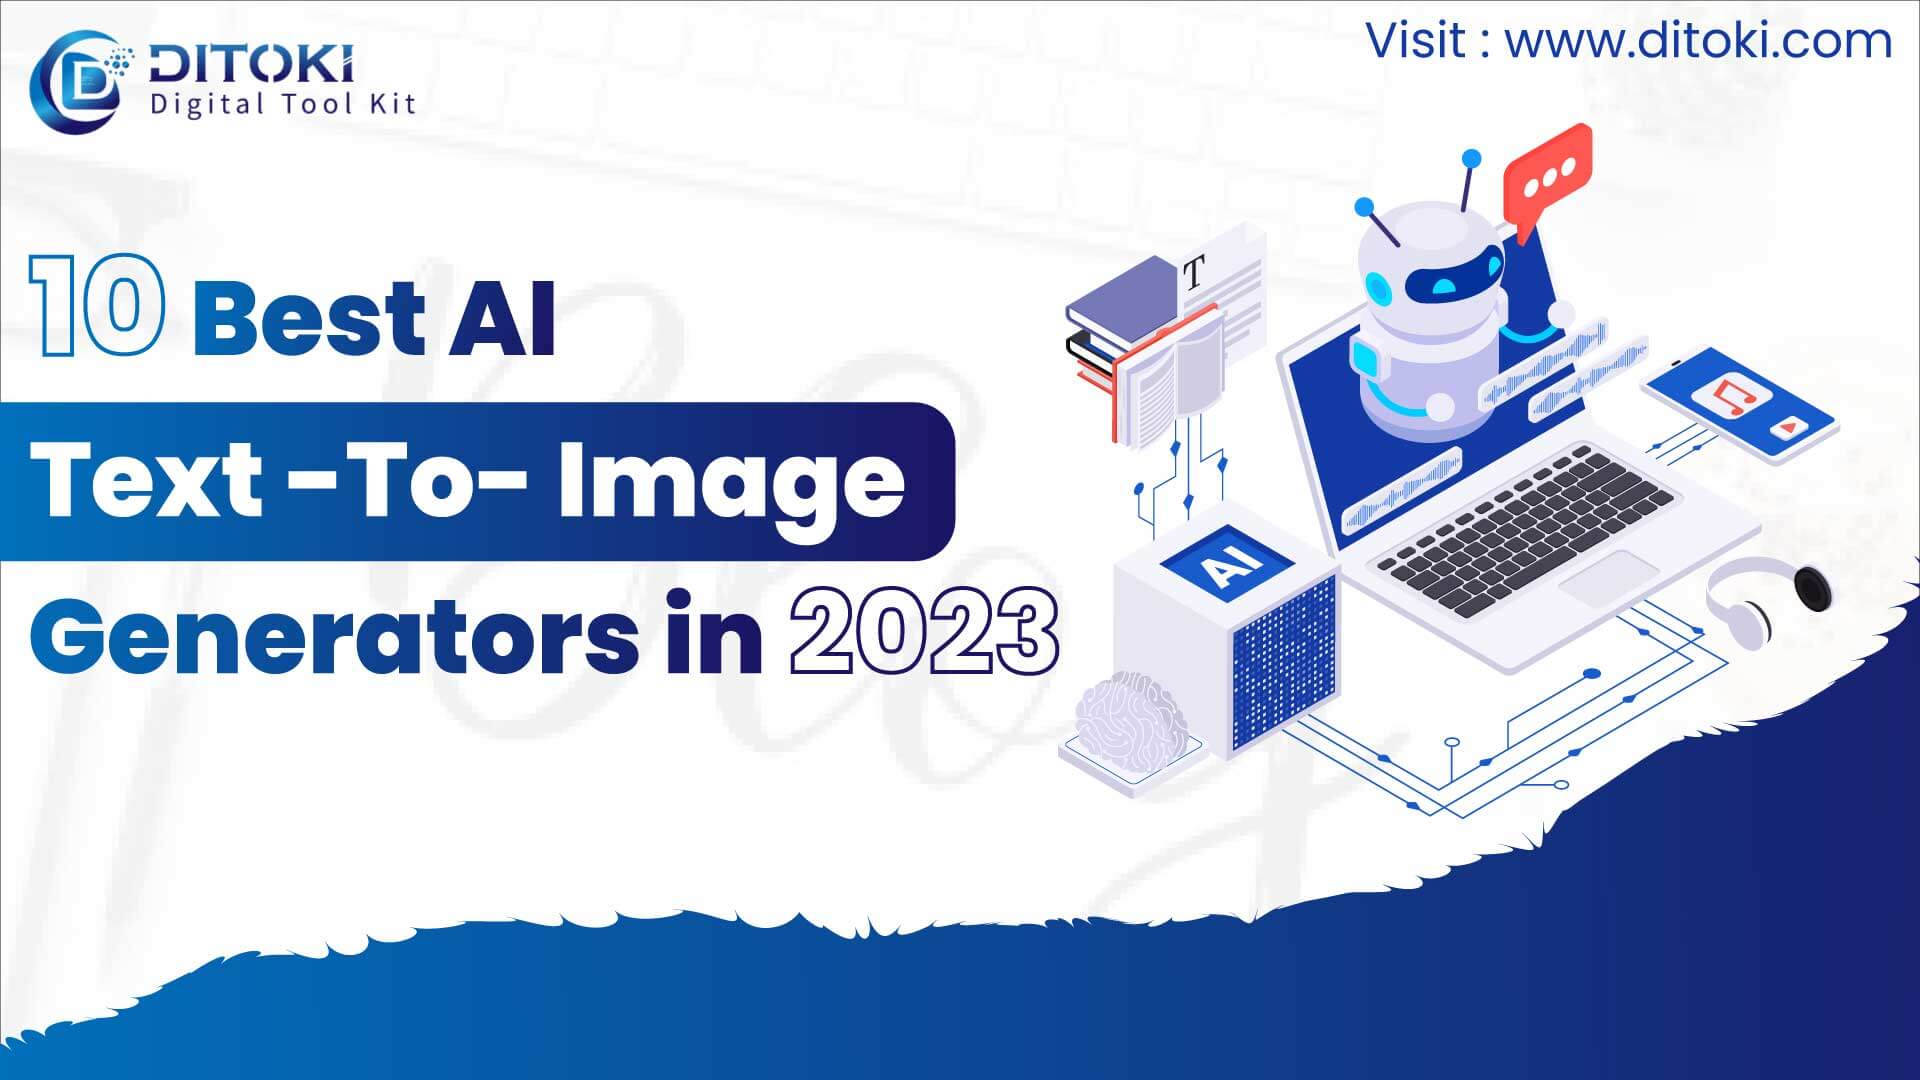 10 Best AI Text-To-Image Generators